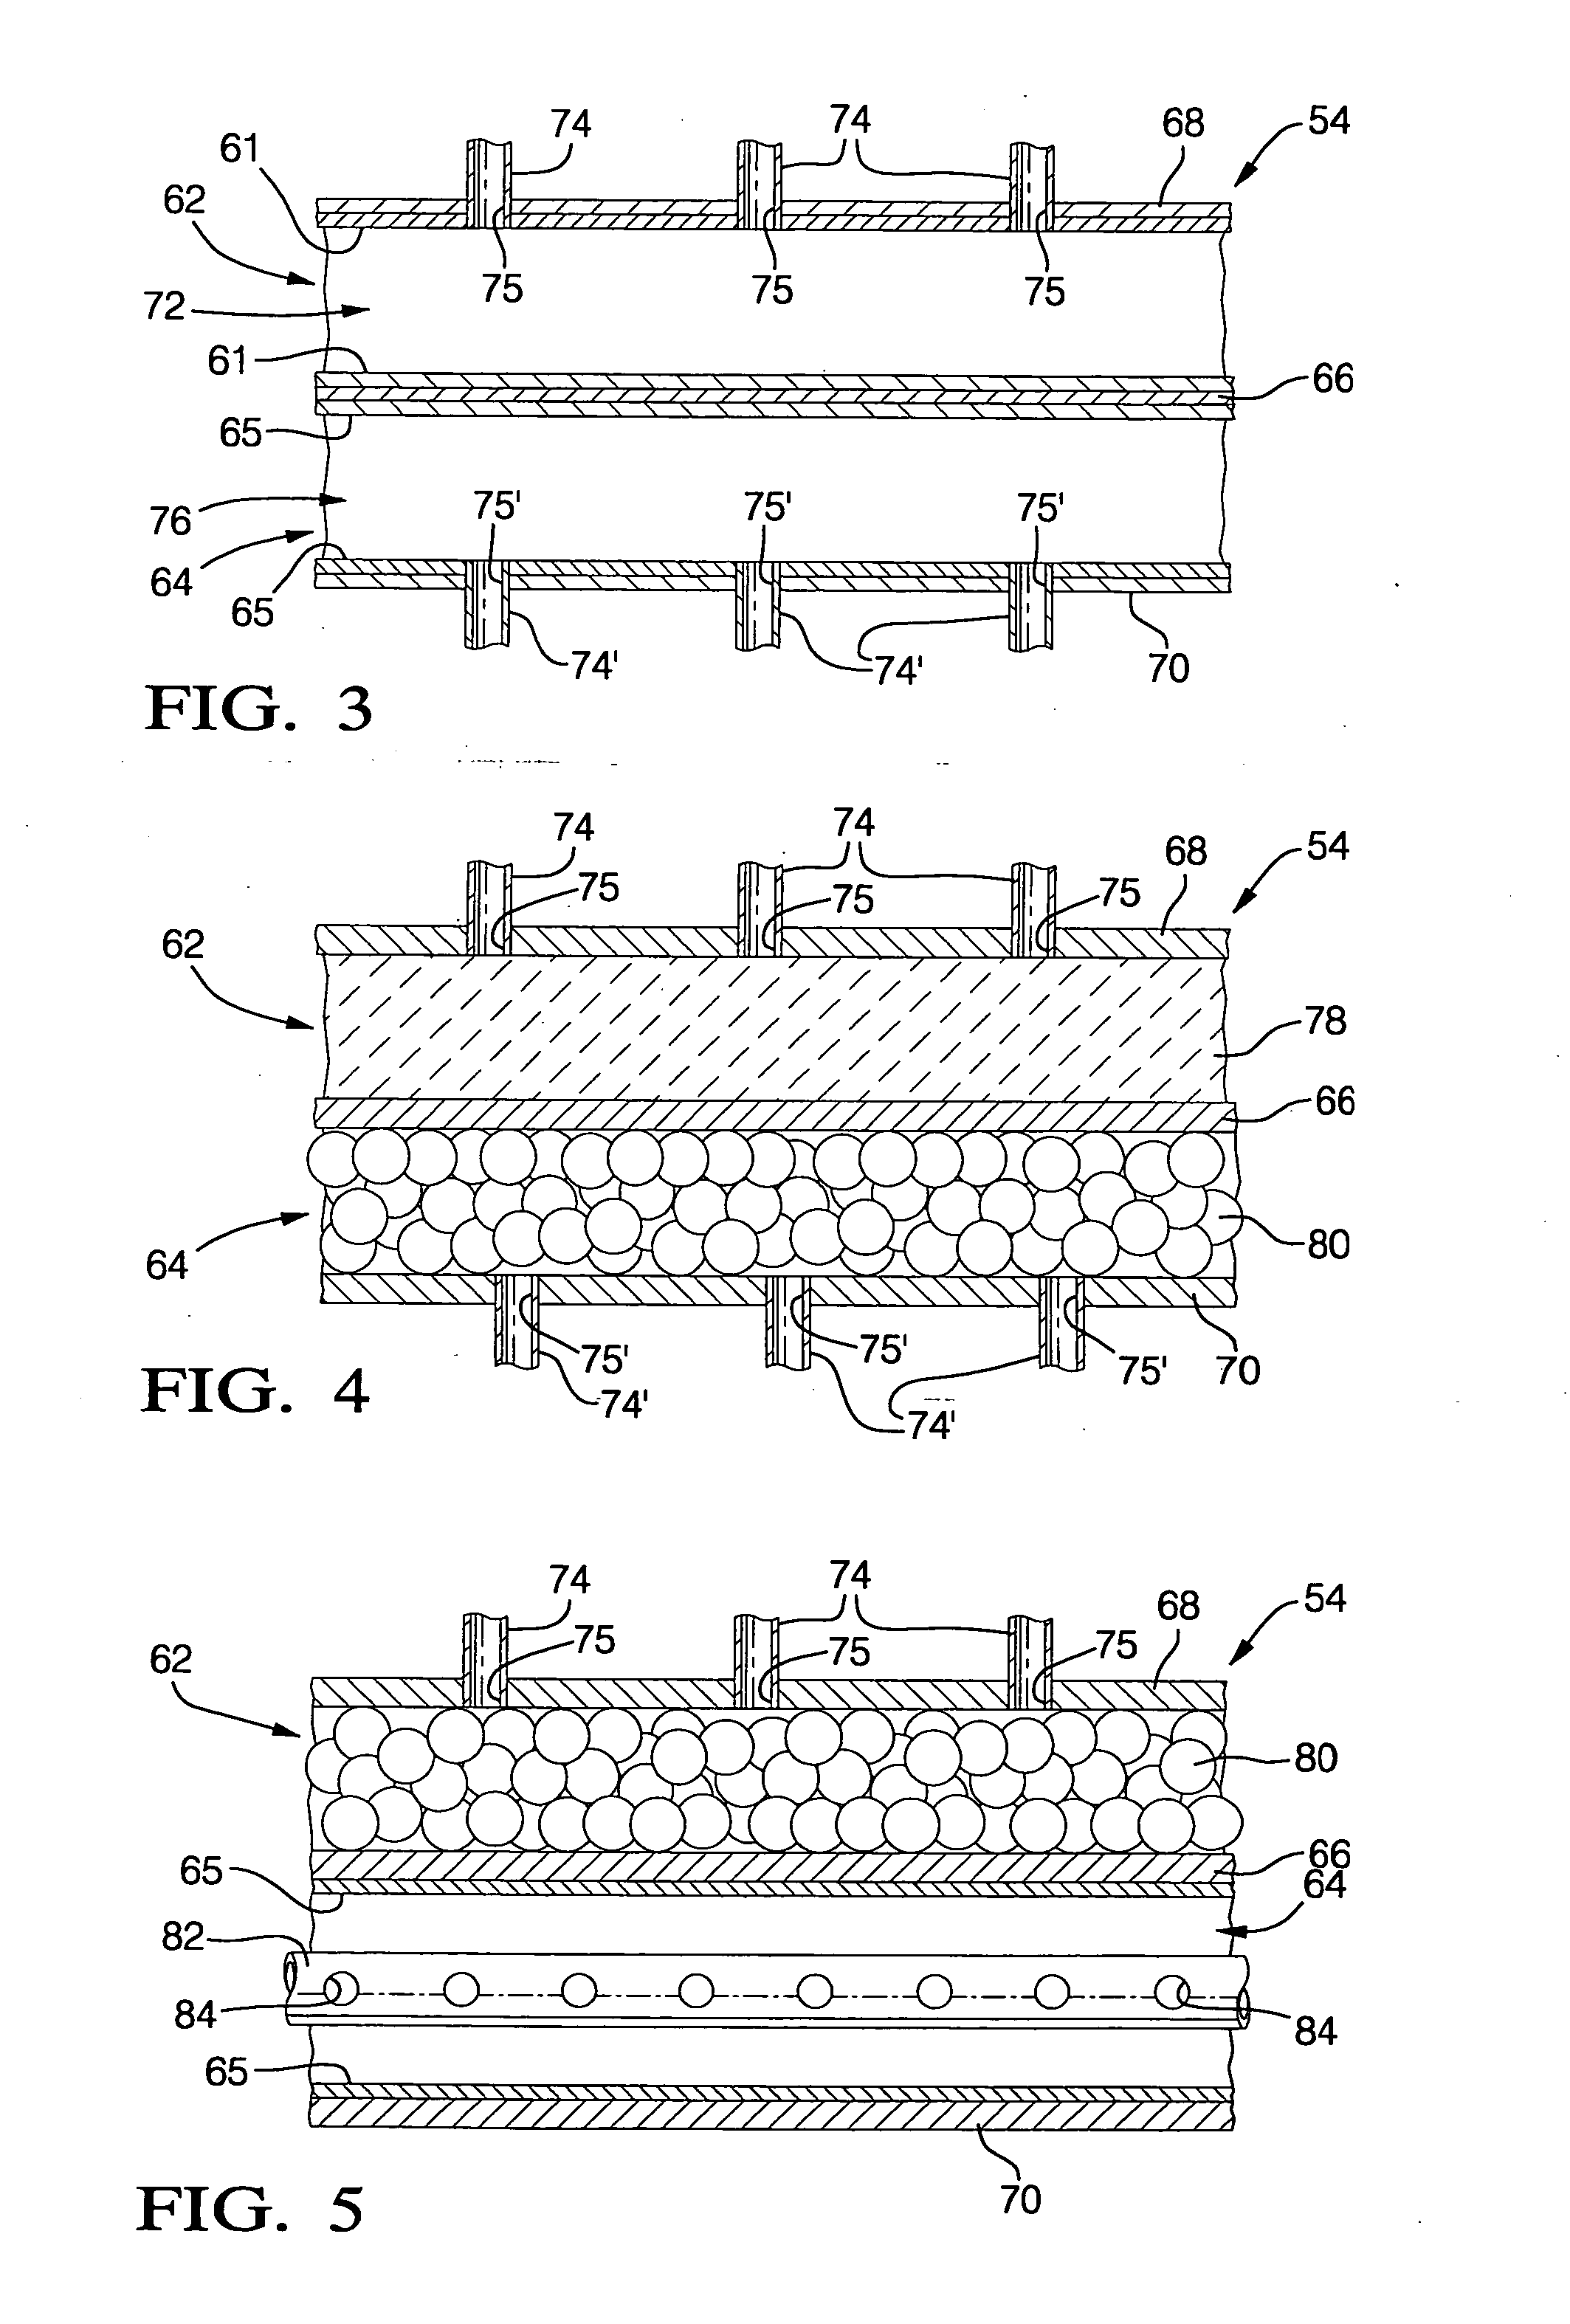 Multiple stage combustion process to maintain a controllable reformation temperature profile